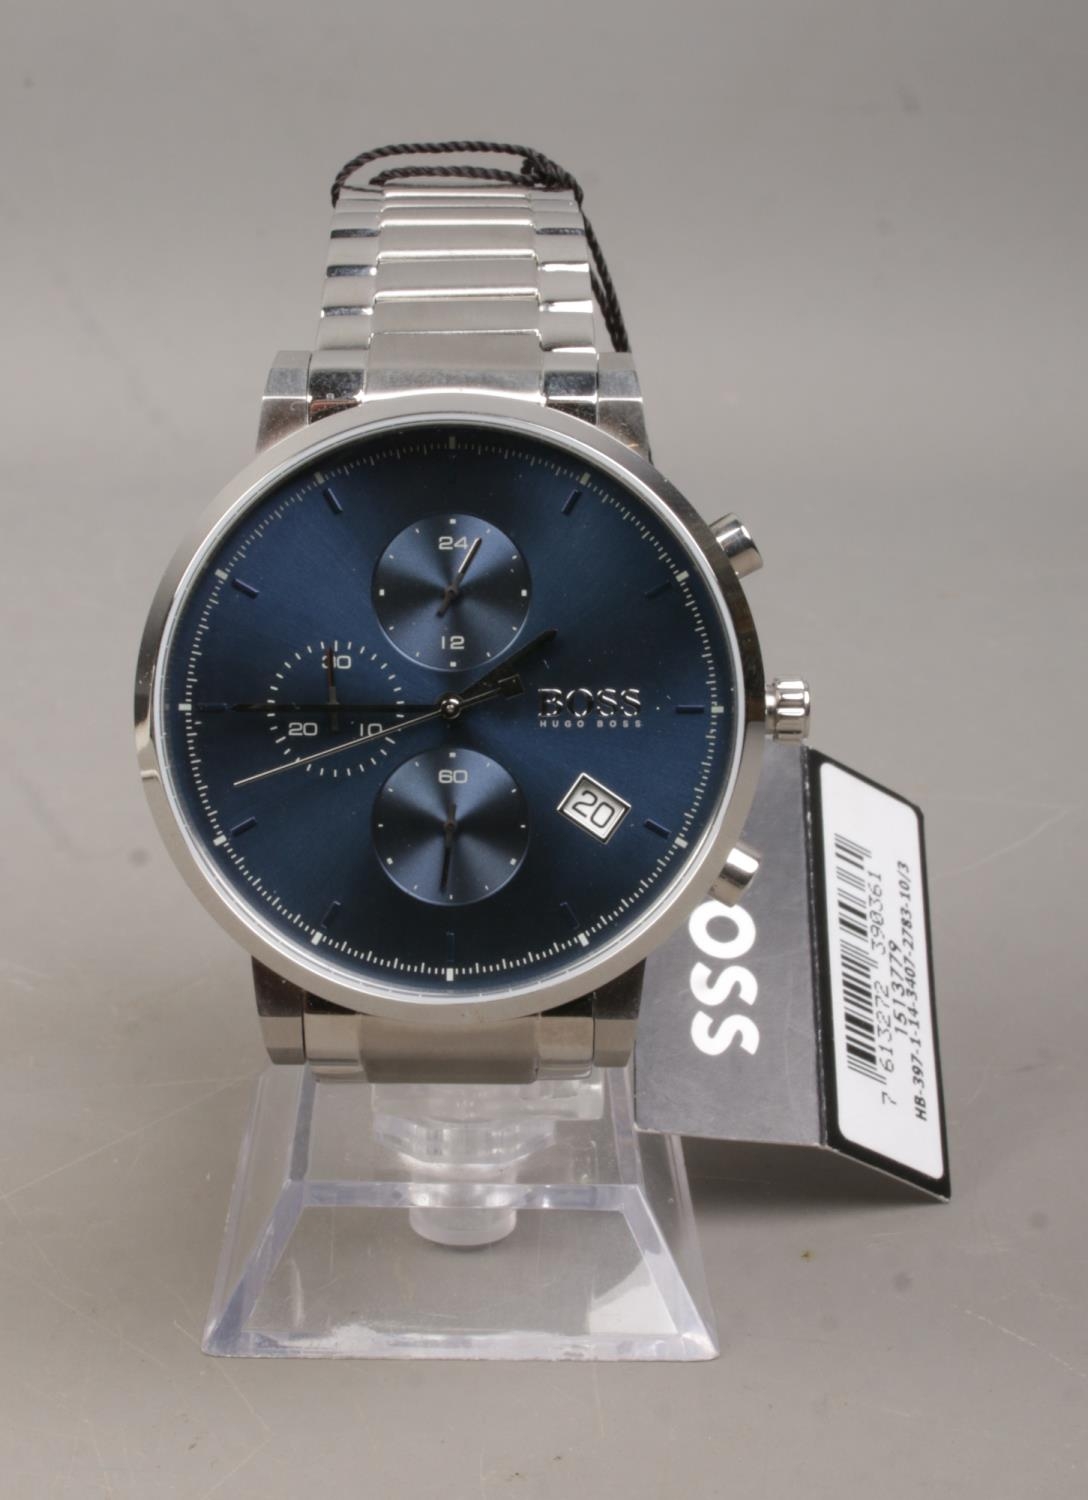 A Gents Hugo Boss Integrity quartz wristwatch, with dark blue dial on stainless steel bracelet - Image 2 of 2